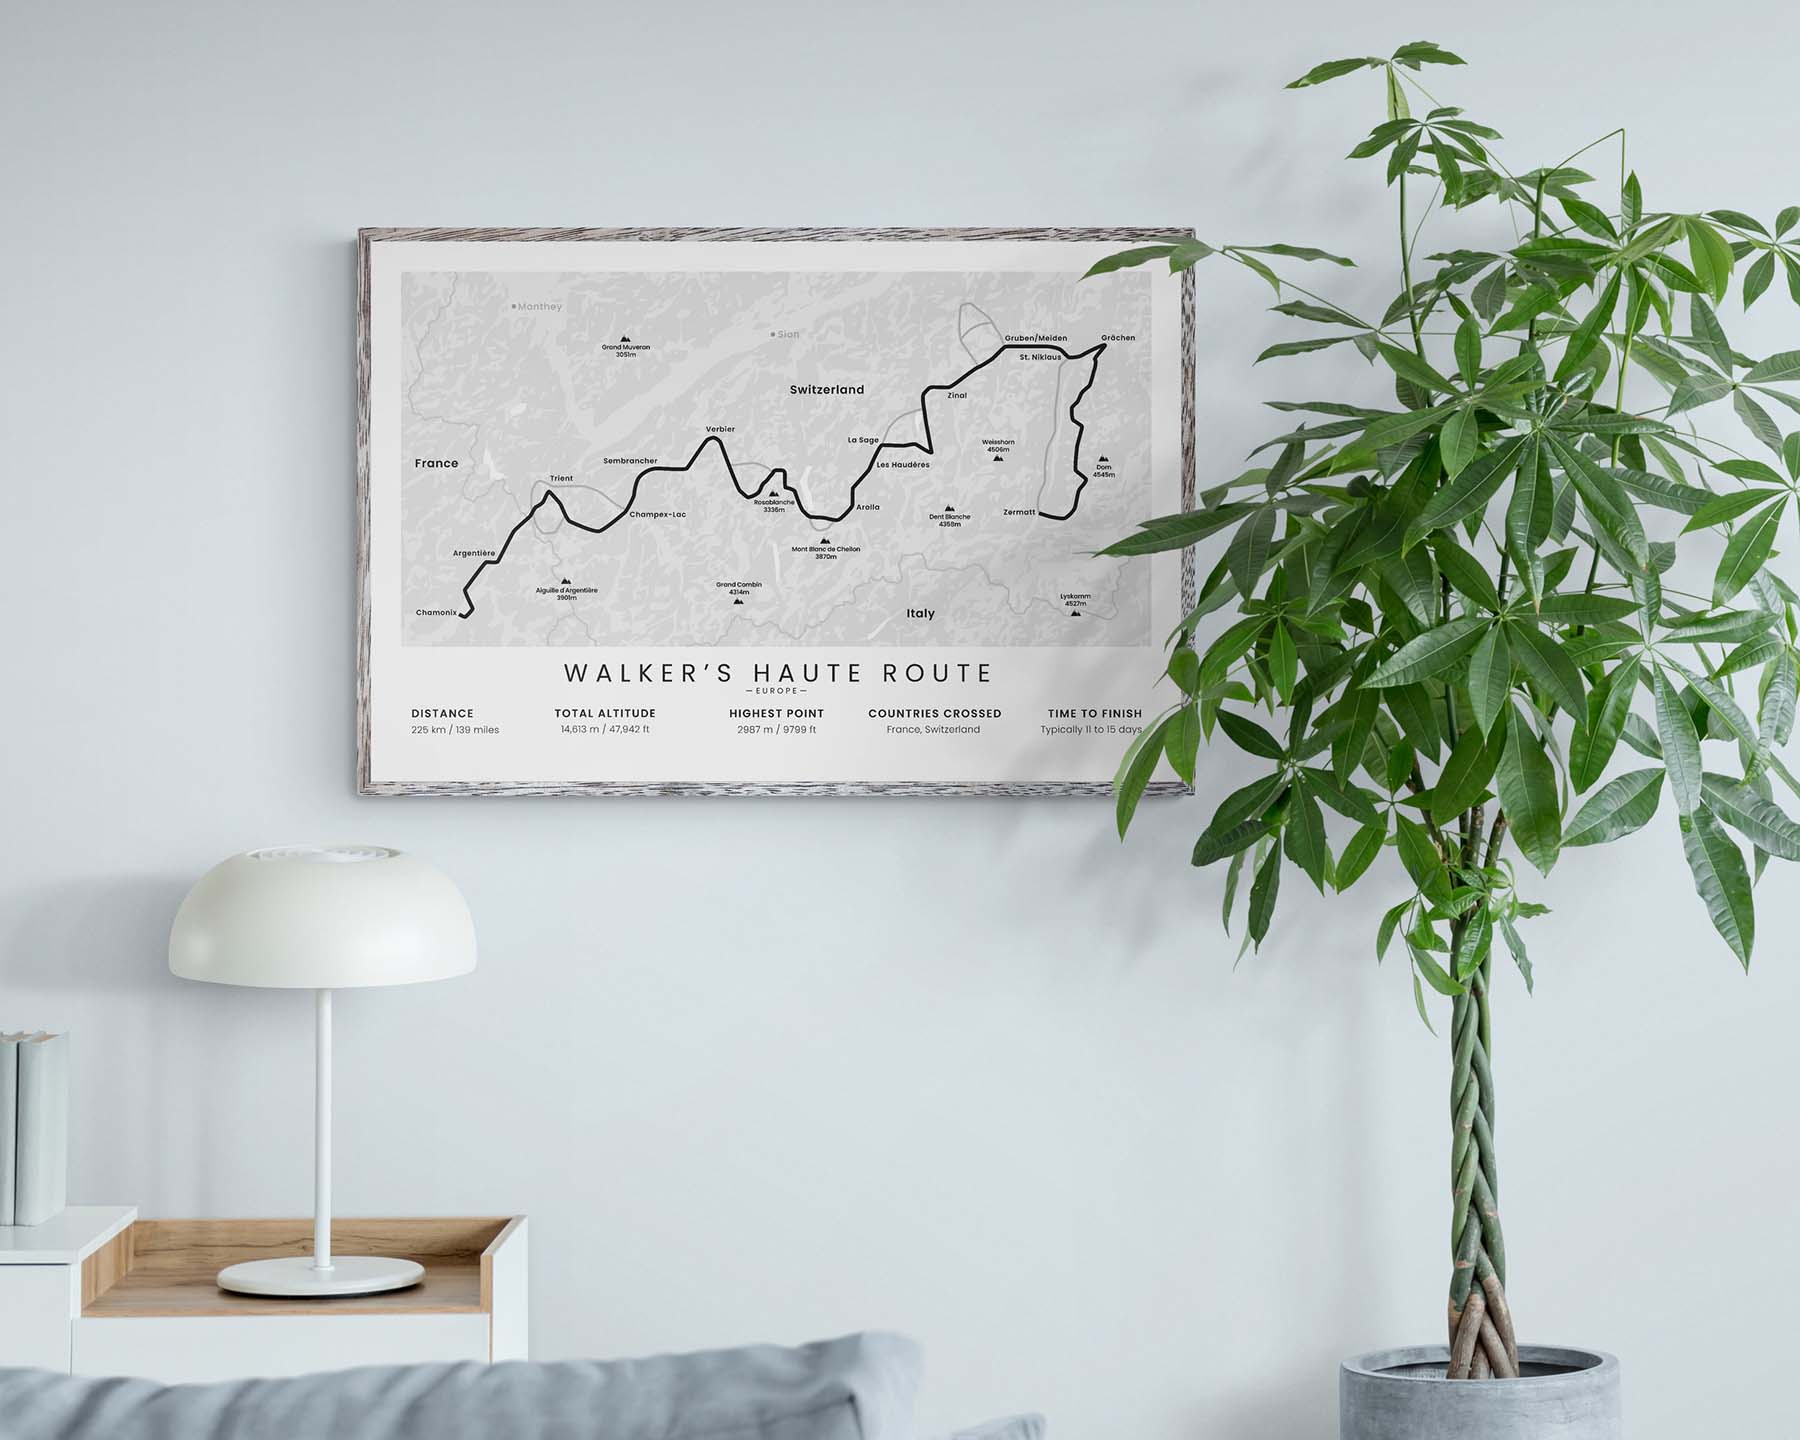 Haute Route Alps (France) route poster in minimal room decor